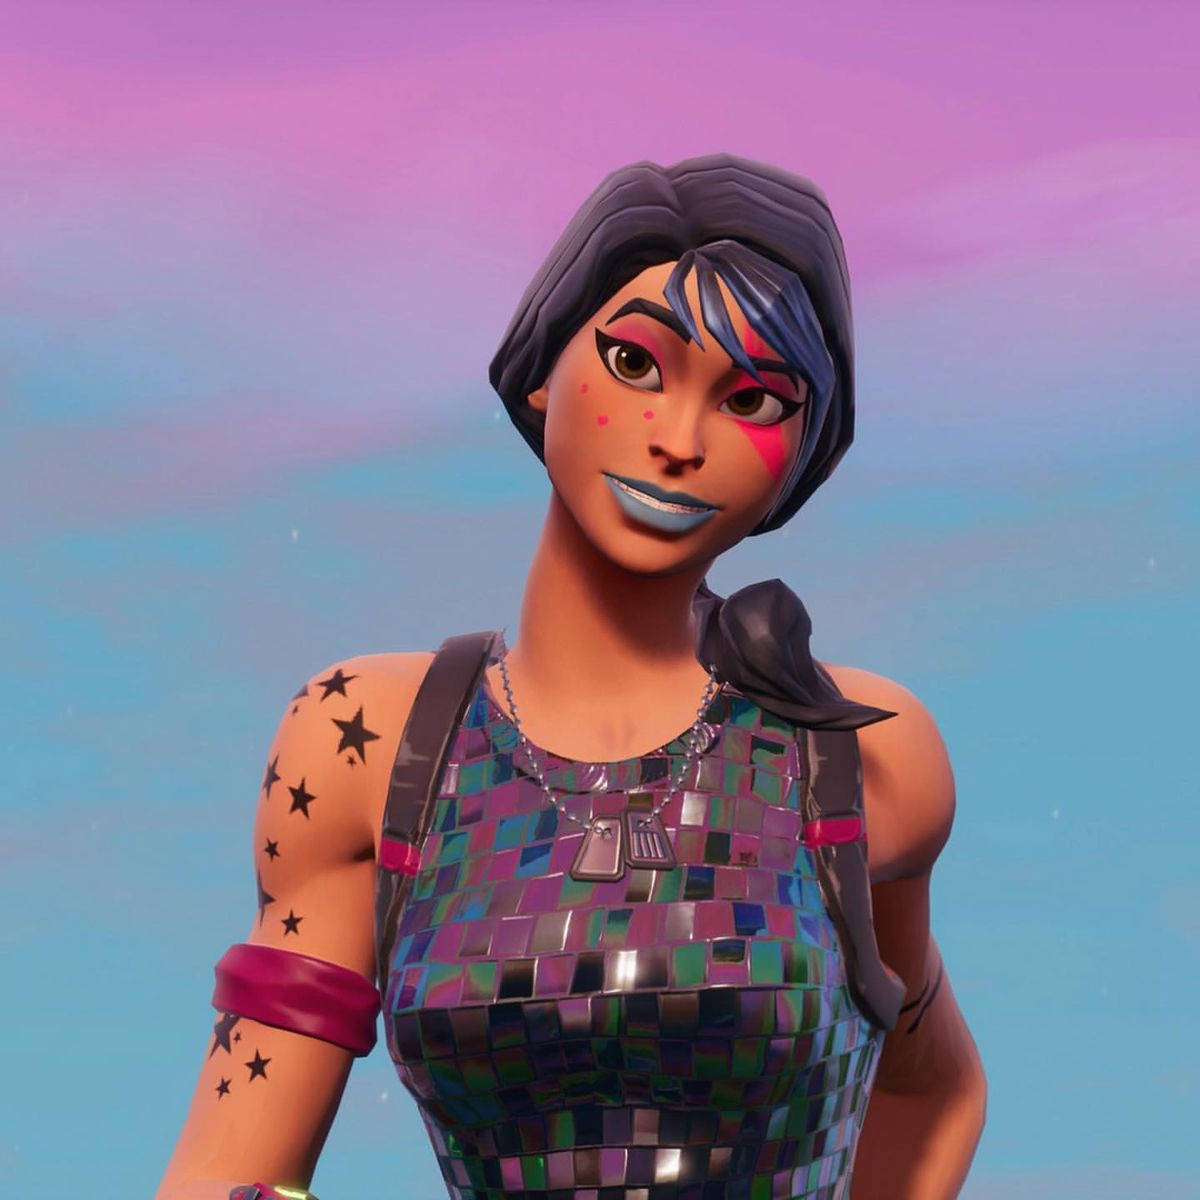 Jump into the world of Fortnite with a unique look from Sparkle Specialist! Wallpaper